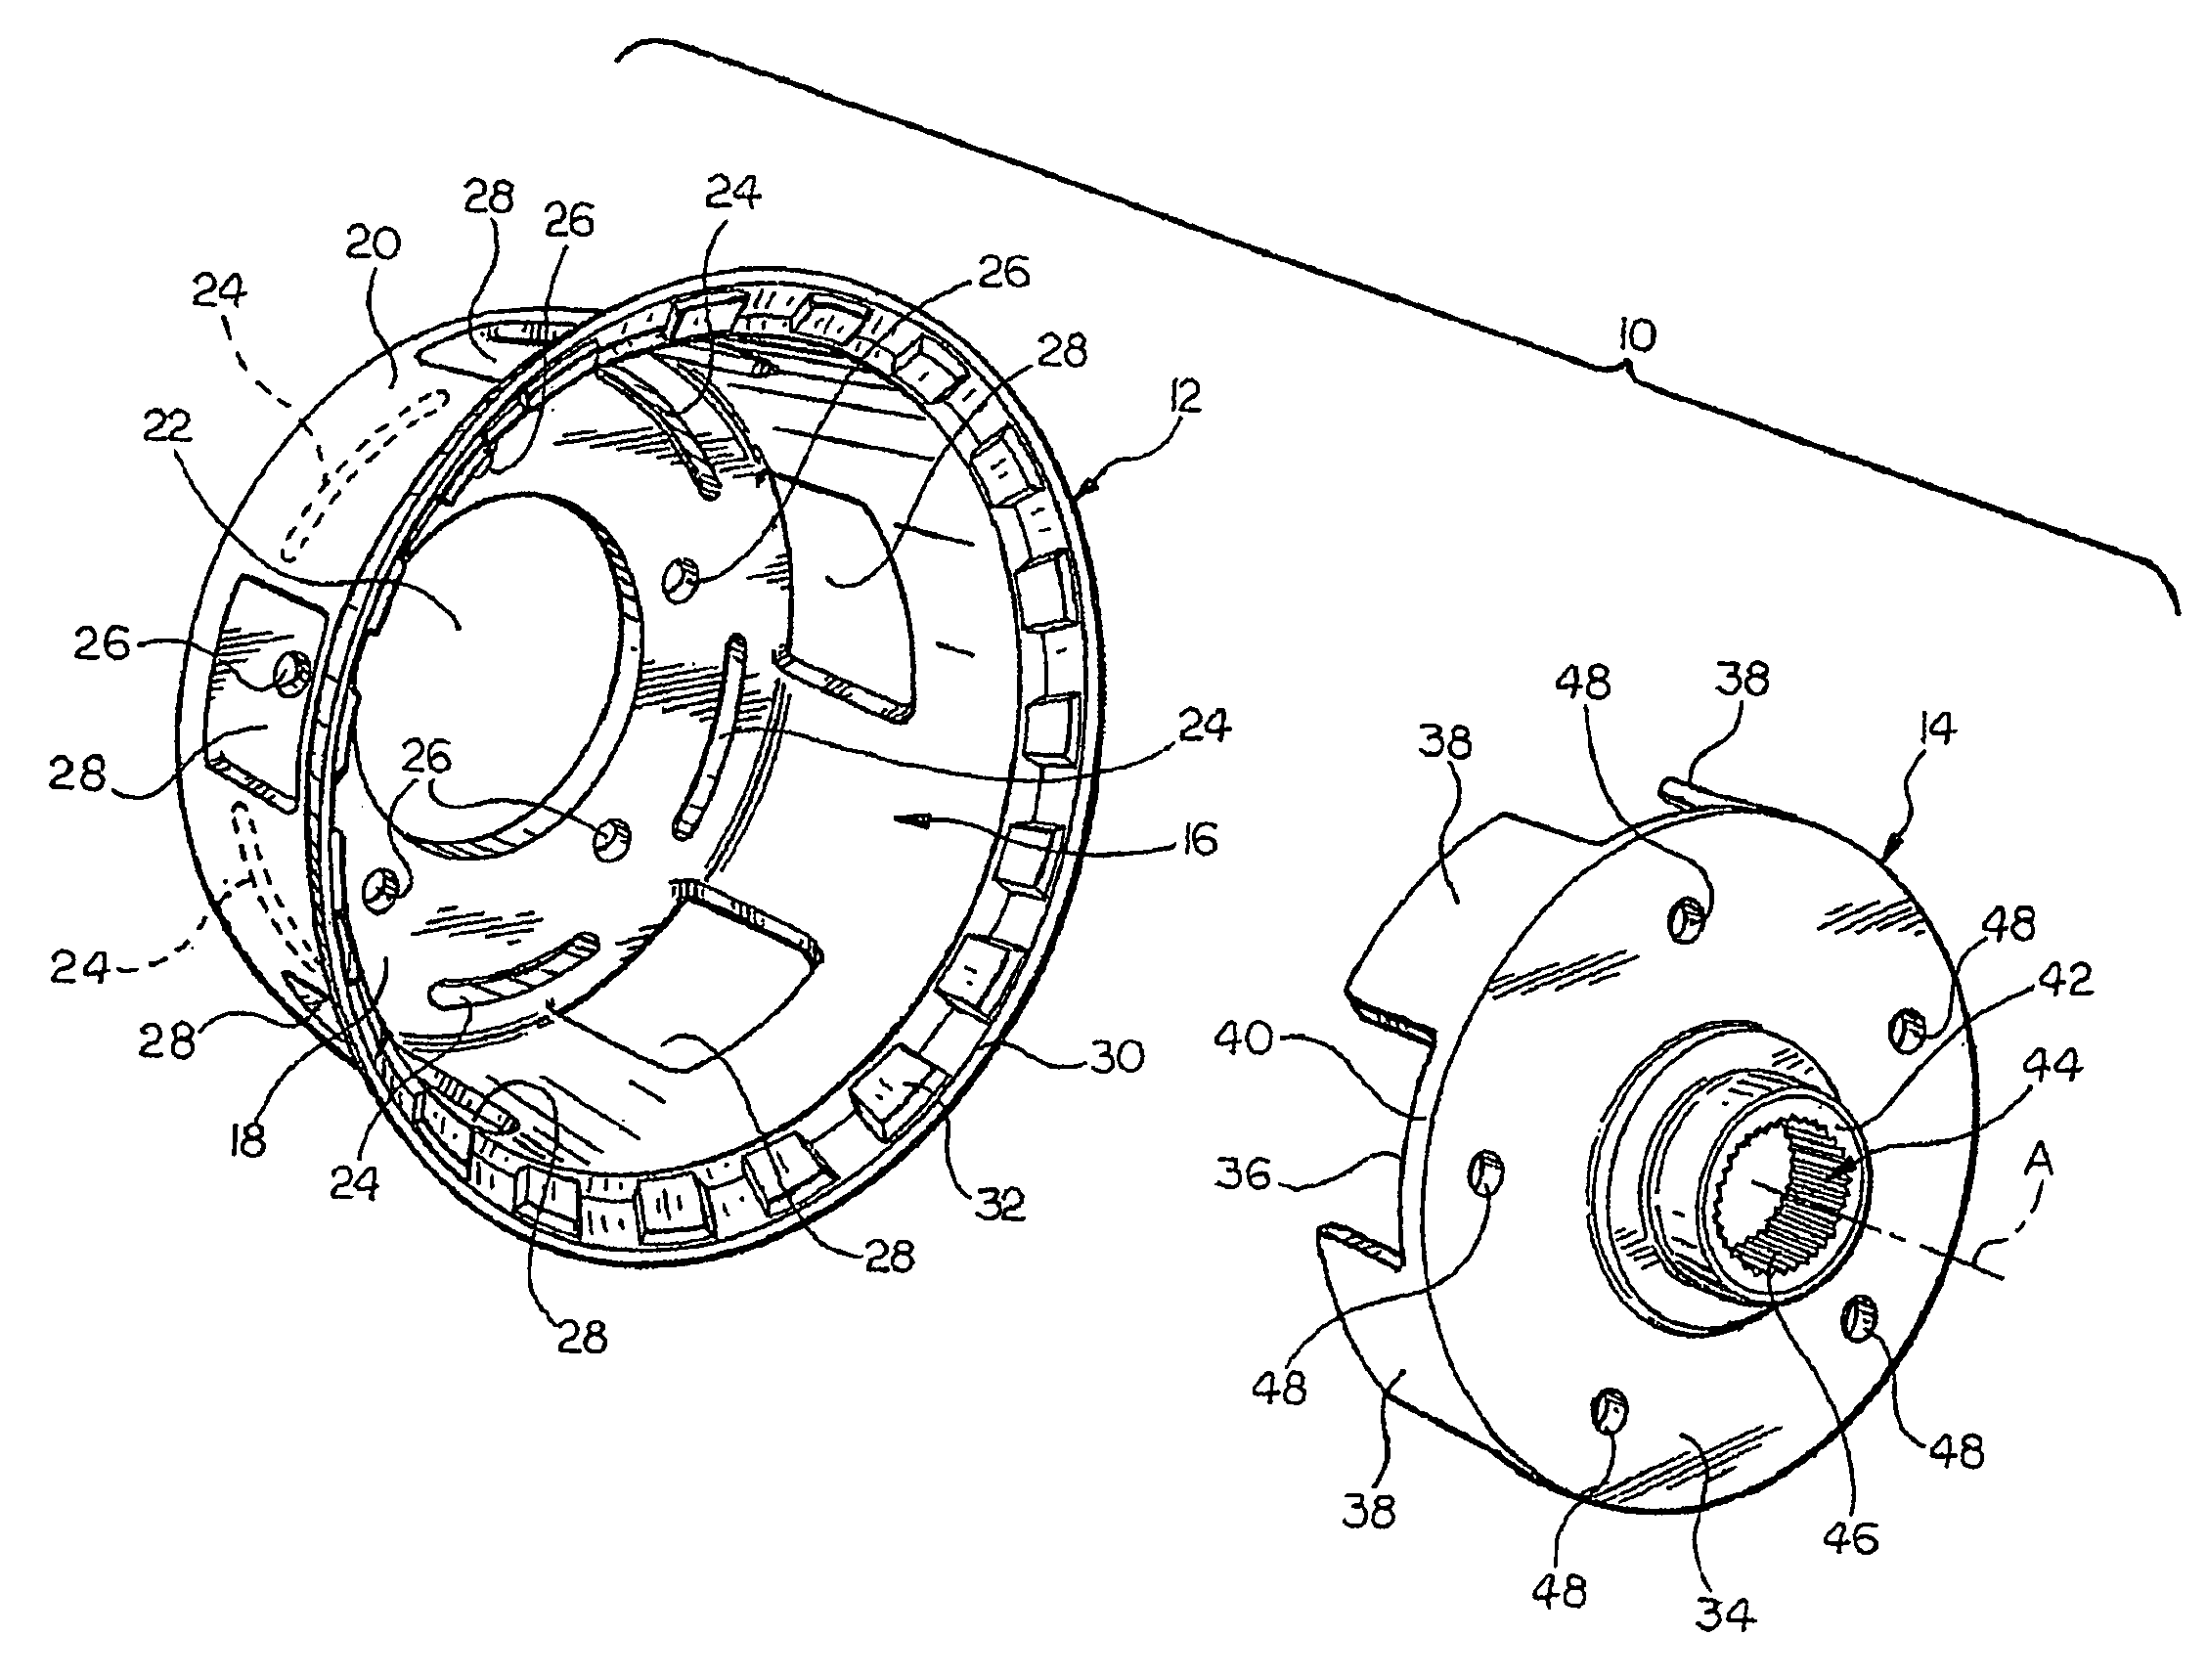 Torque transmitting assembly and method of producing